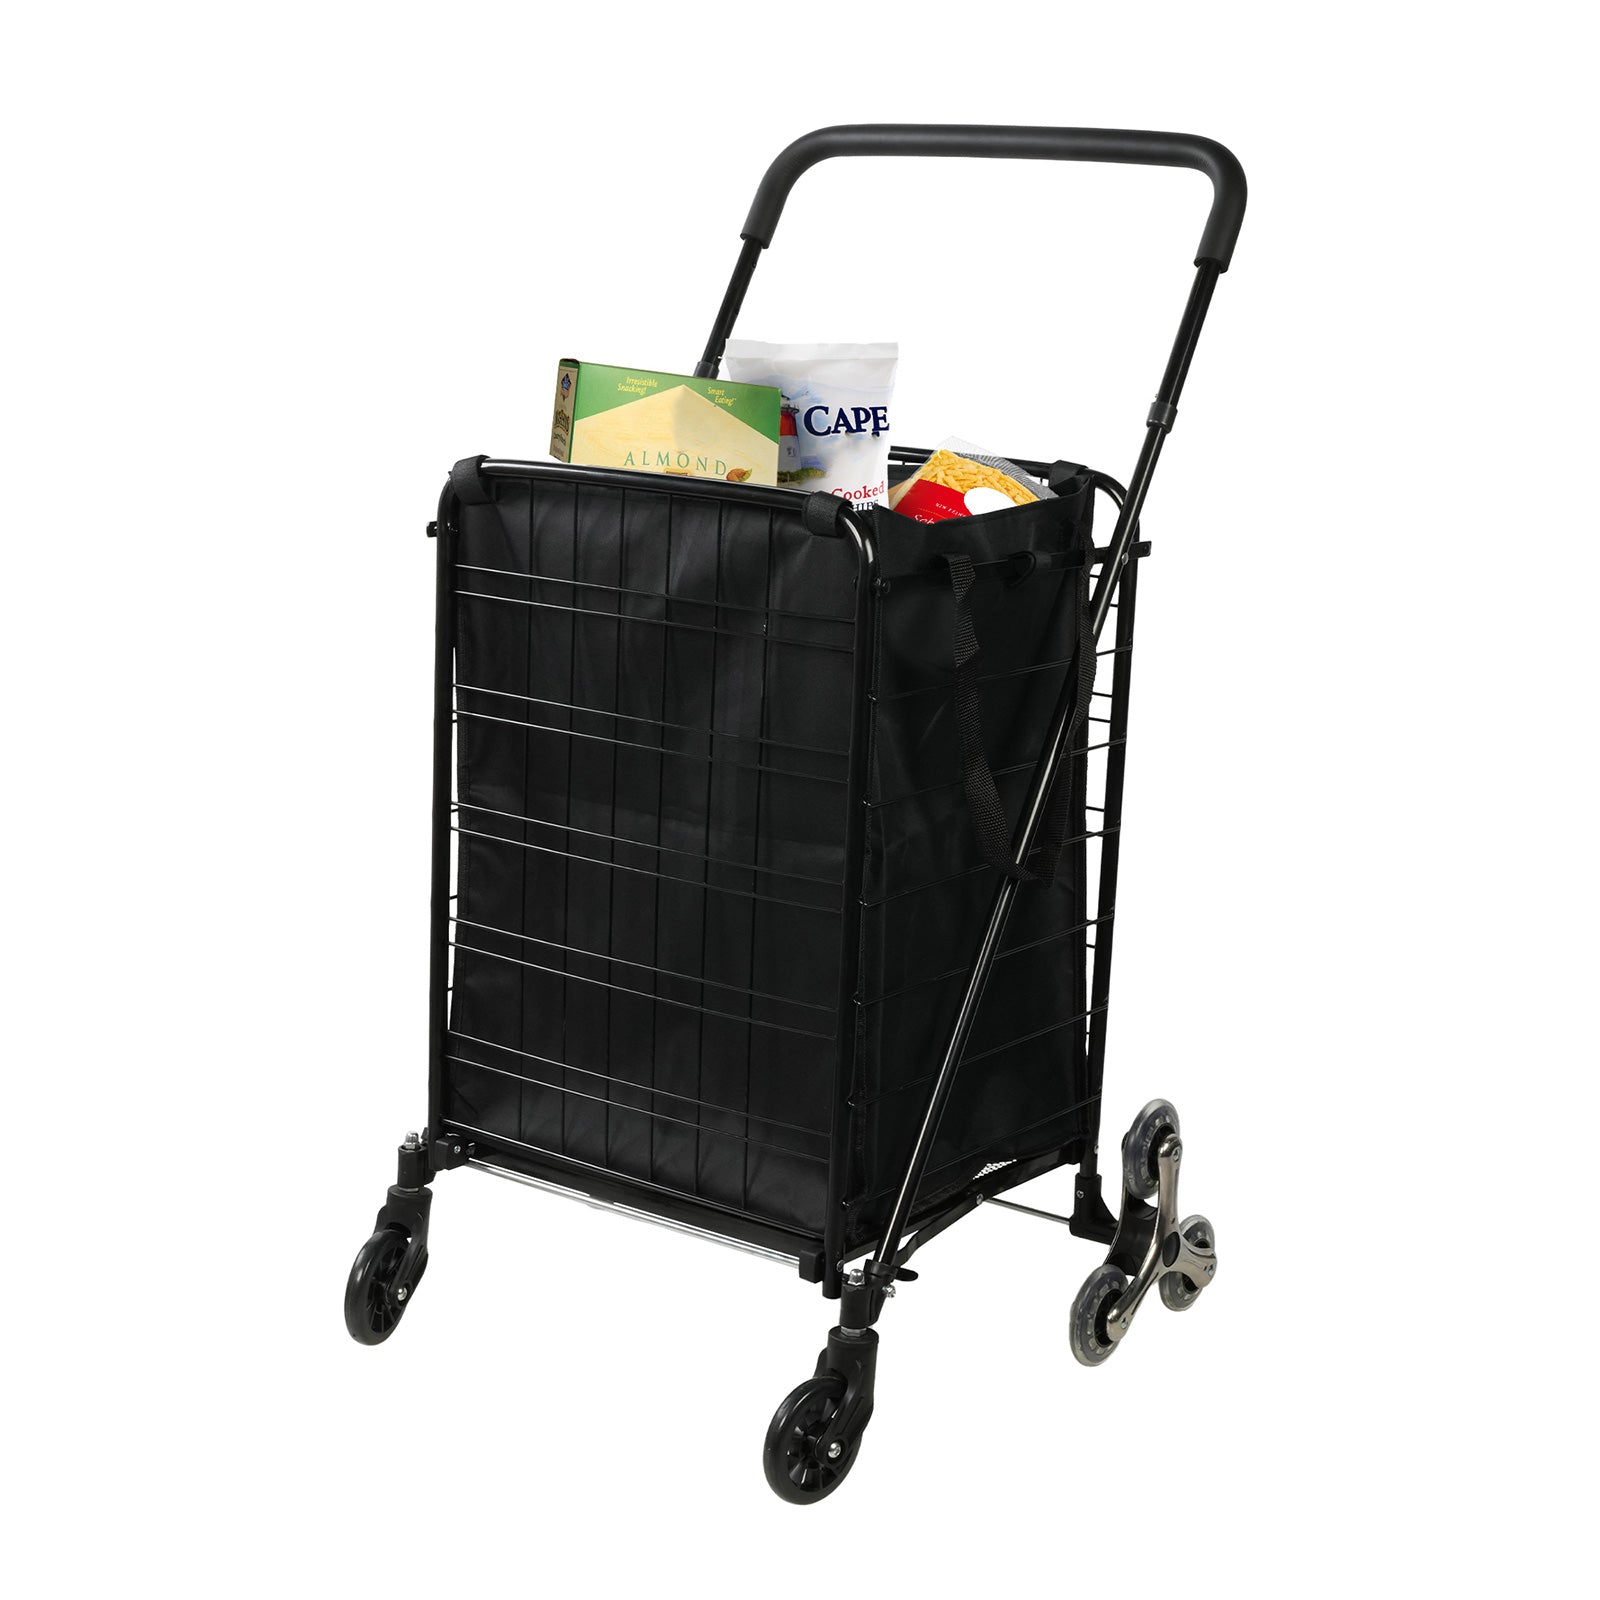 (Out of Stock) Folding Shopping Cart with Wheels and Removable Cloth Liner Holds Up to 77 Lbs.